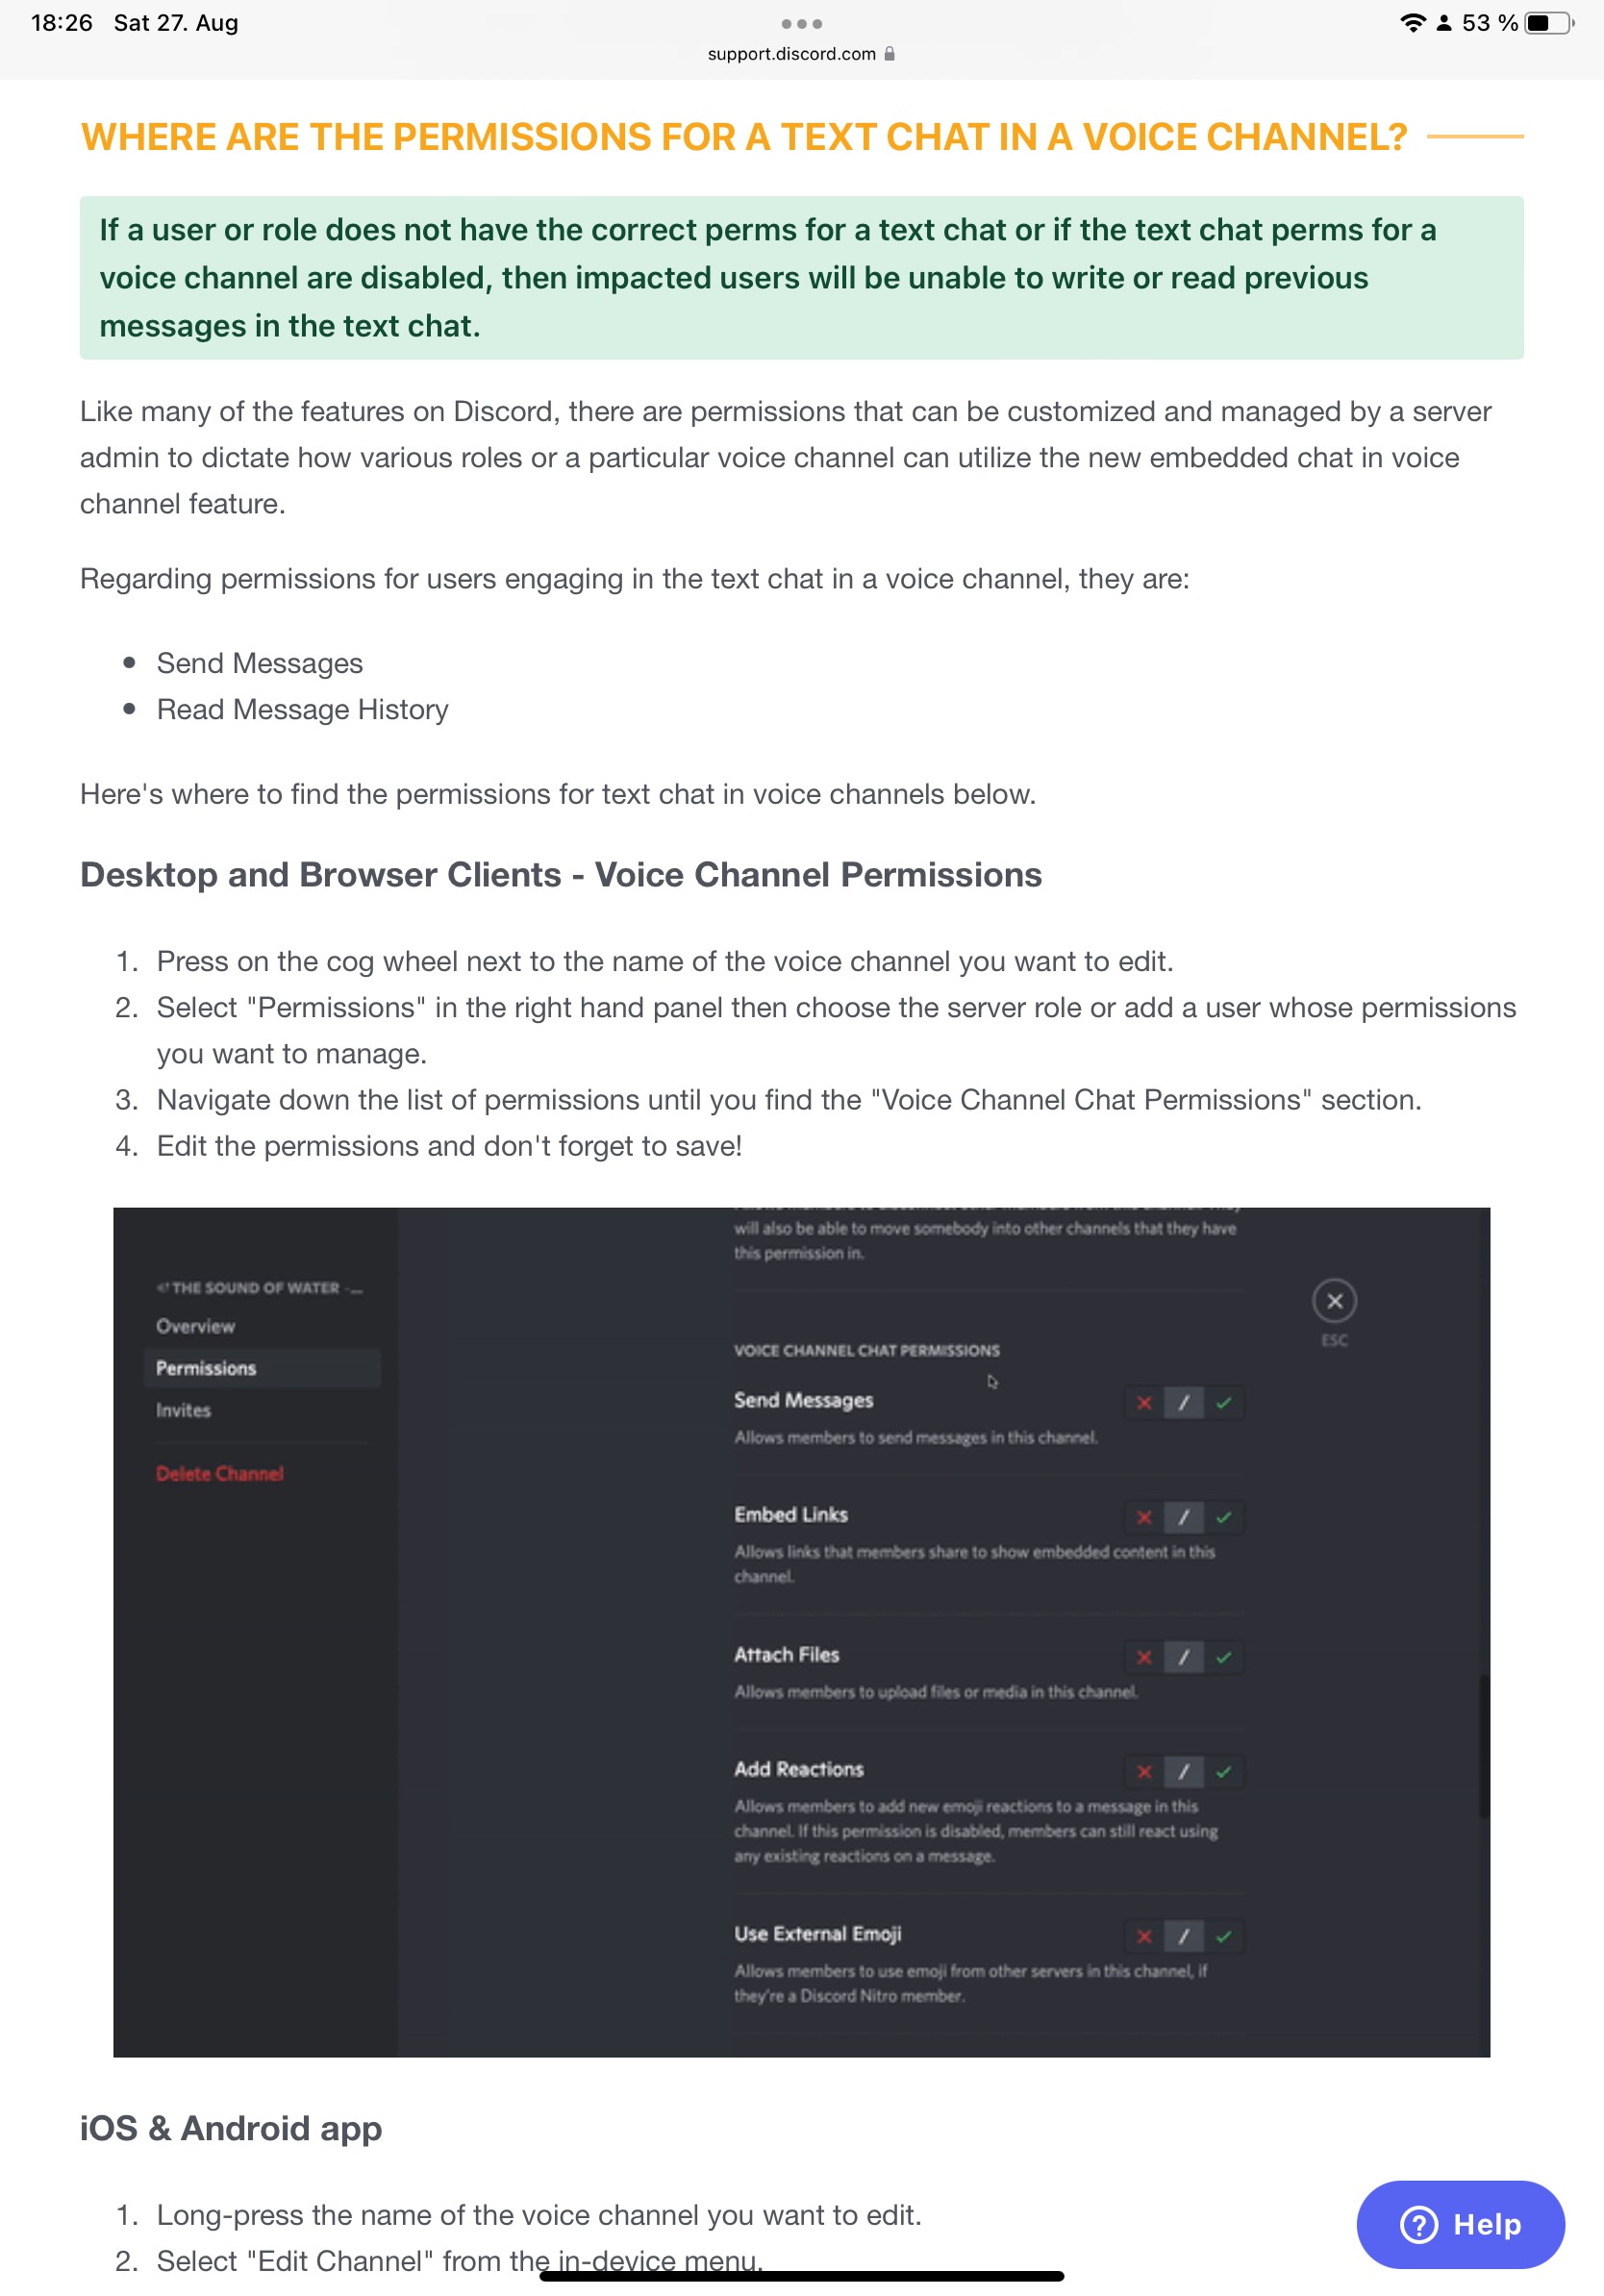 Discord documentation page showing how to add required permissions to users in voice chat